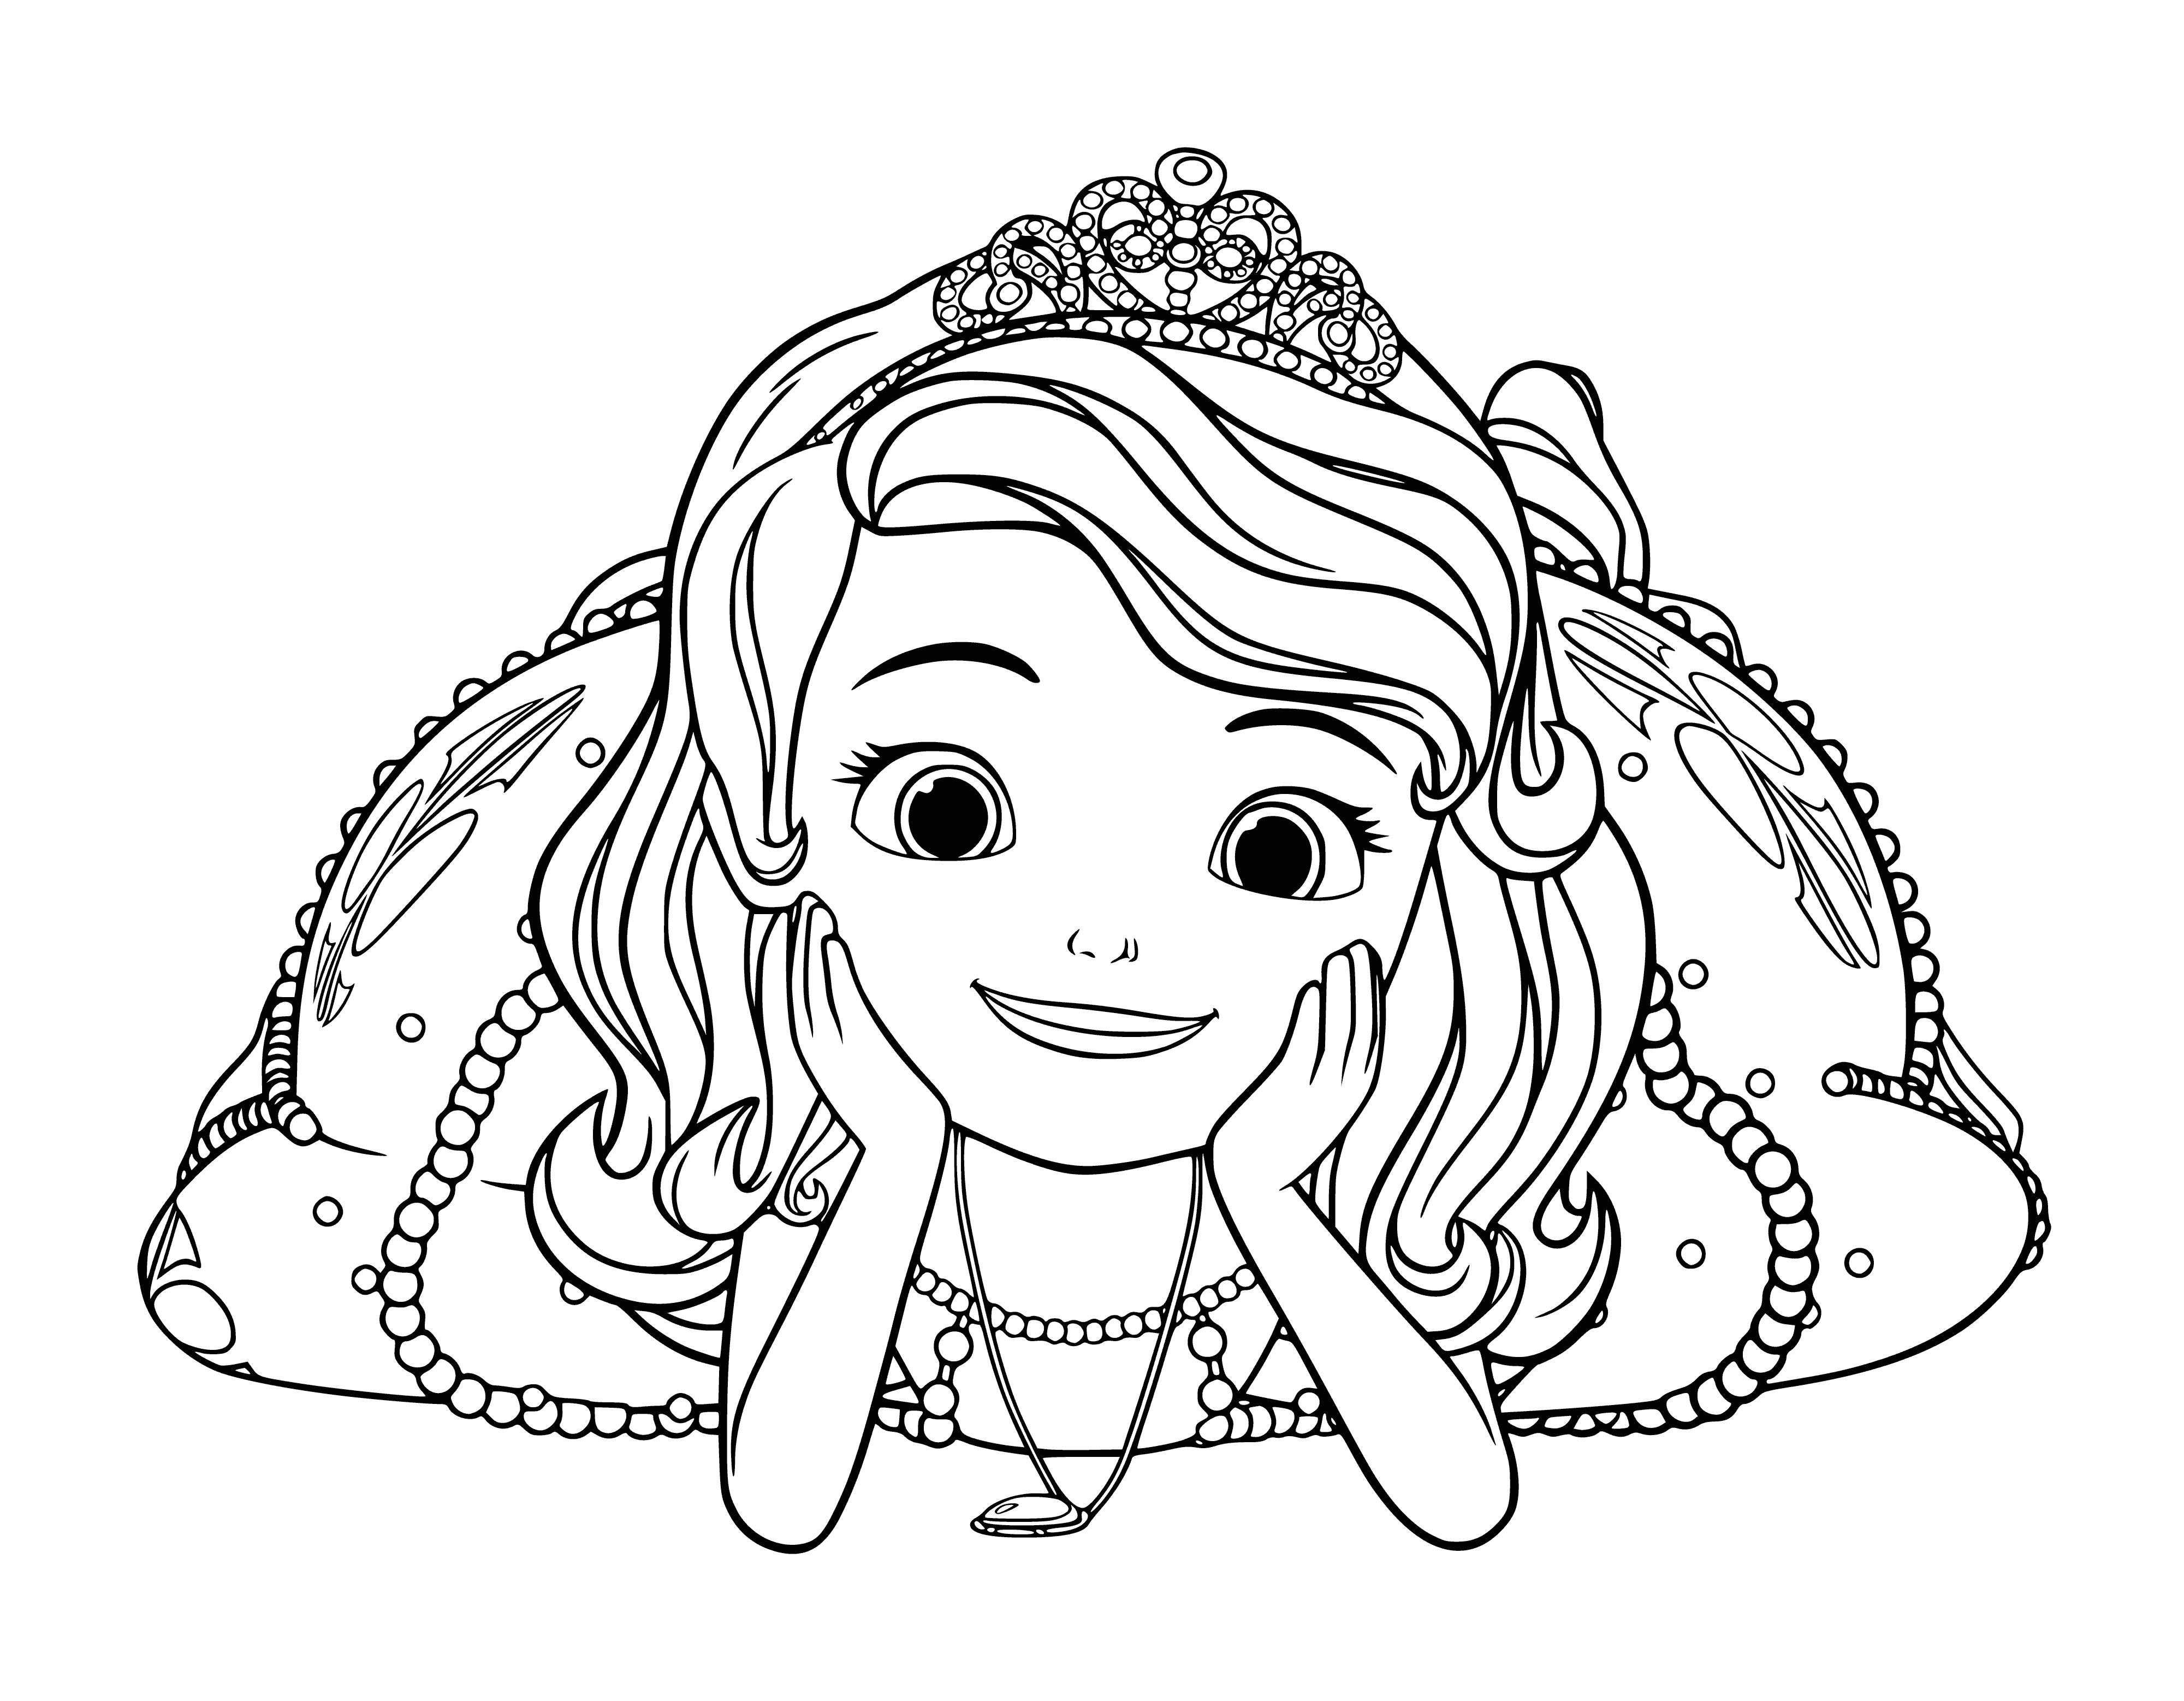 Sofia the First coloring page